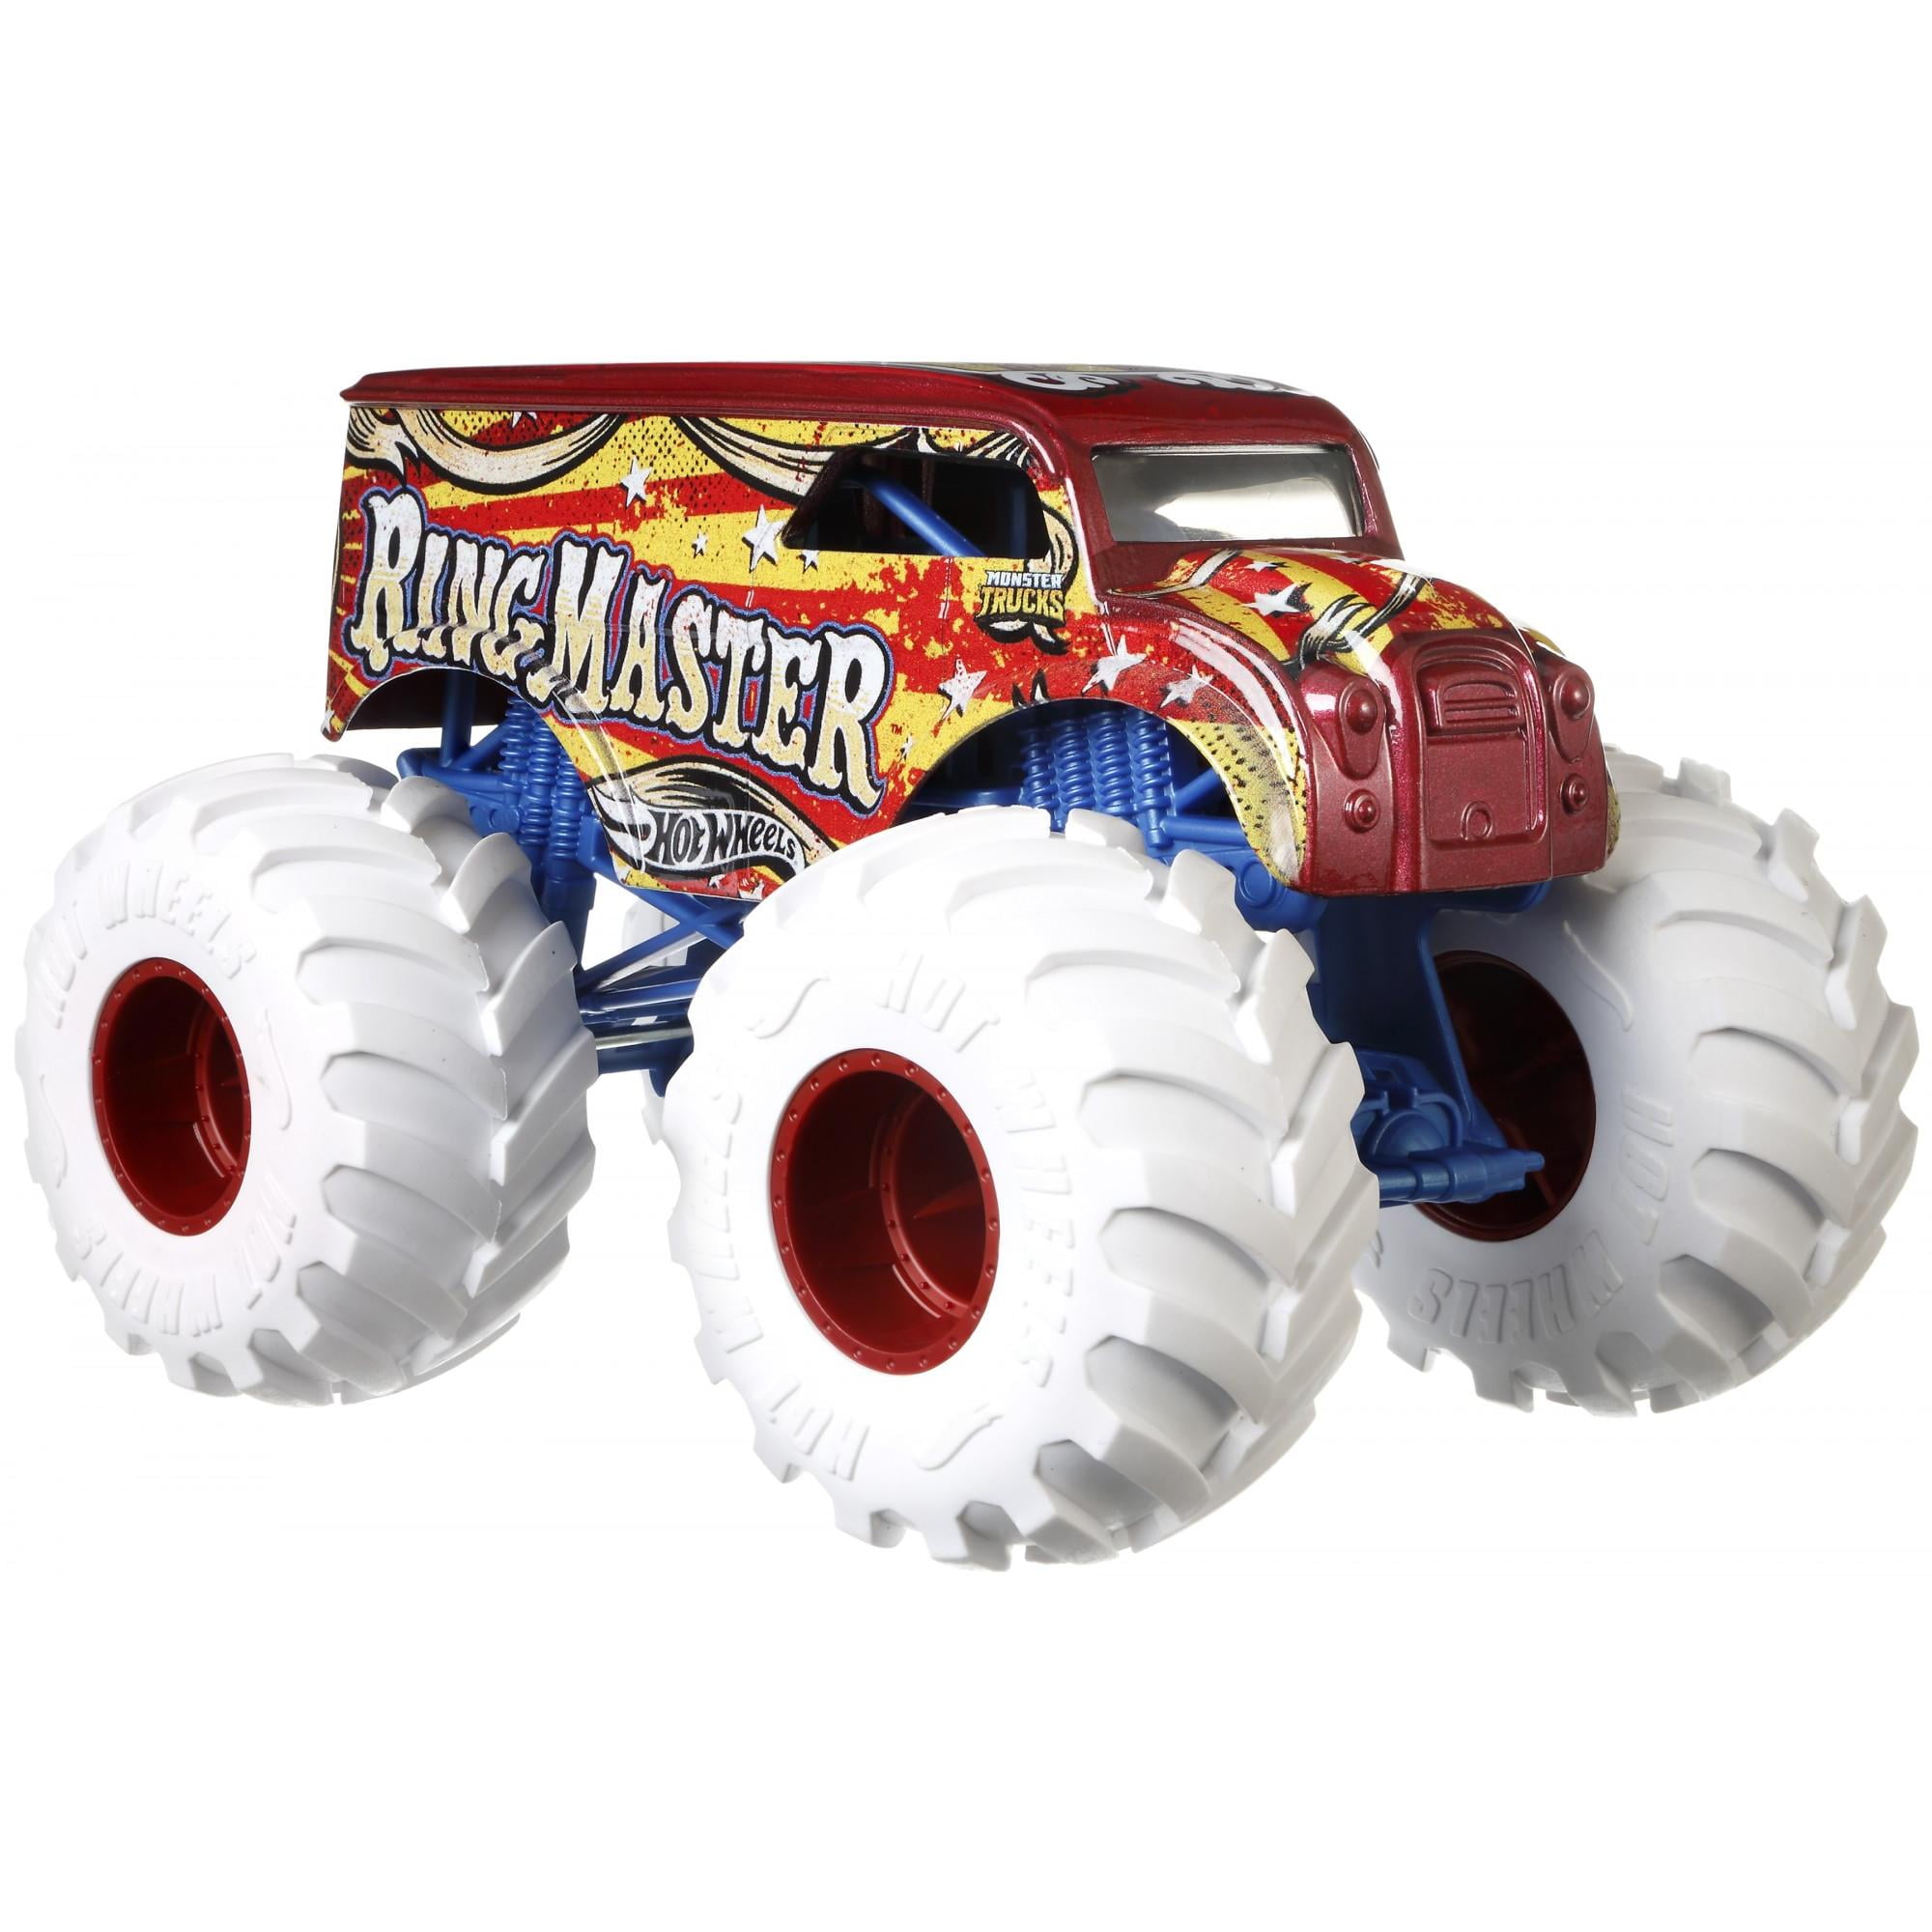 Hot Wheels Monster Trucks Dairy Delivery